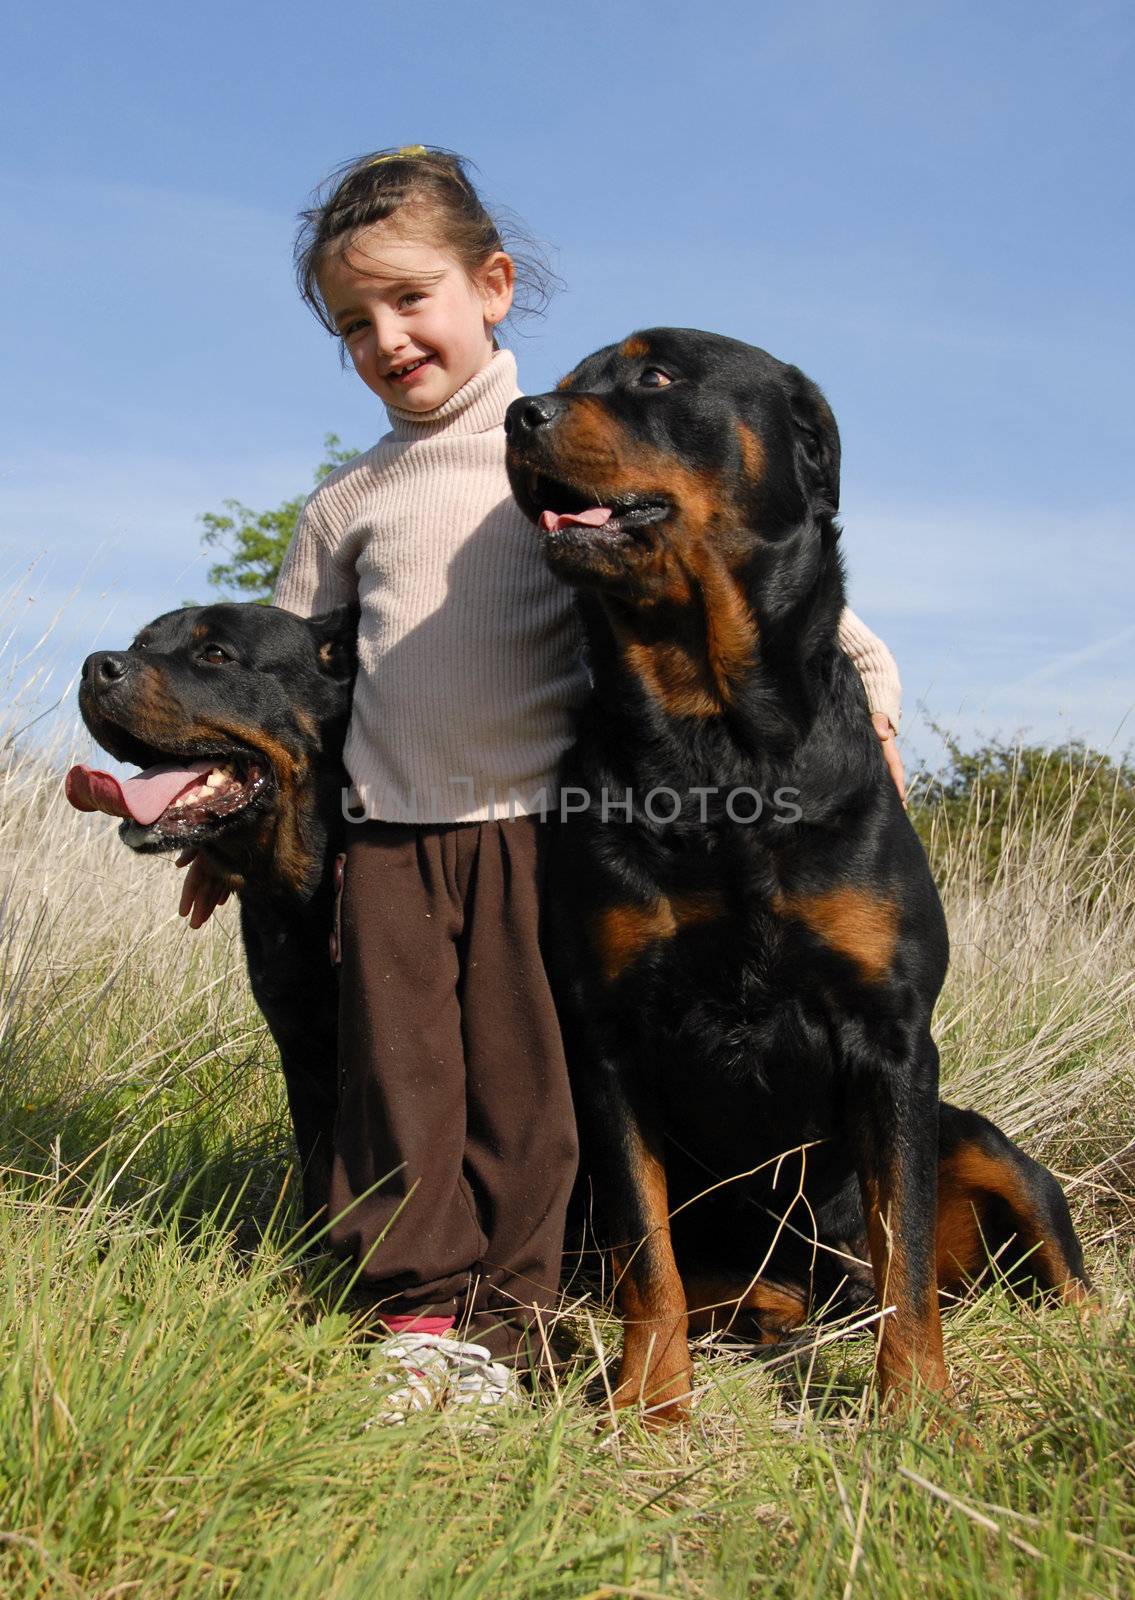 little girl and rottweilers by cynoclub